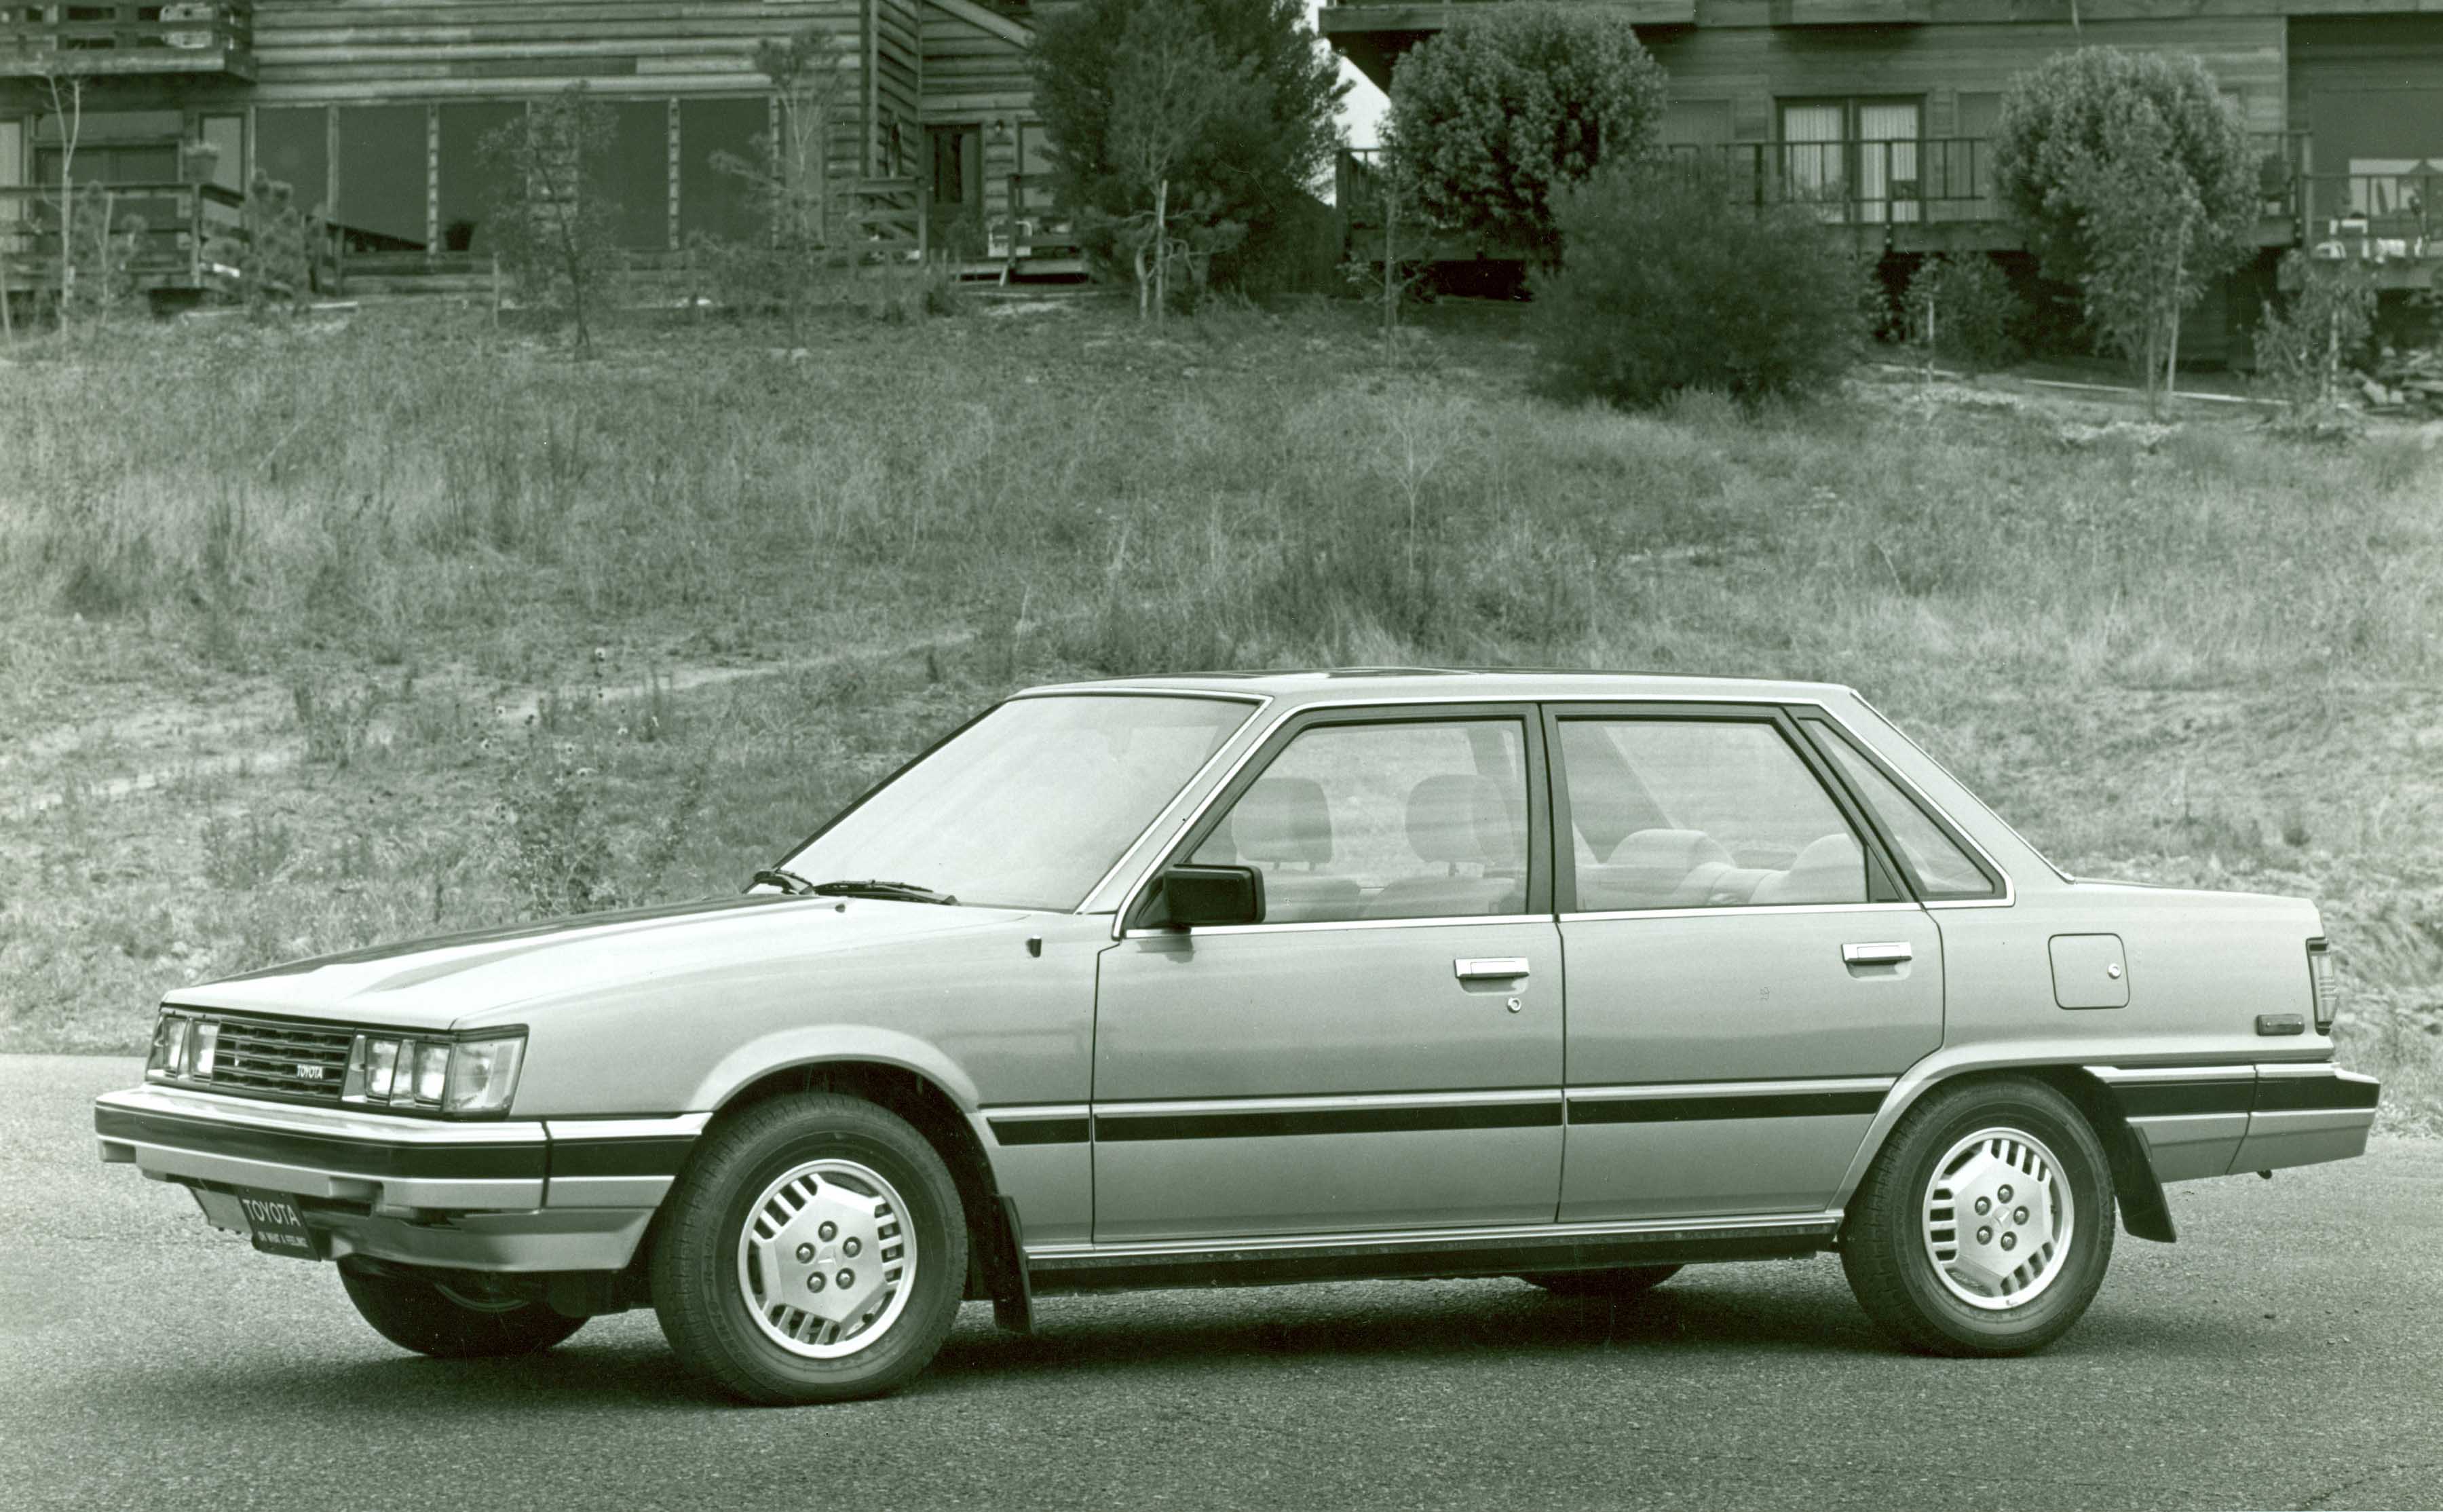 1980s Toyota Camry parked in front of houses.